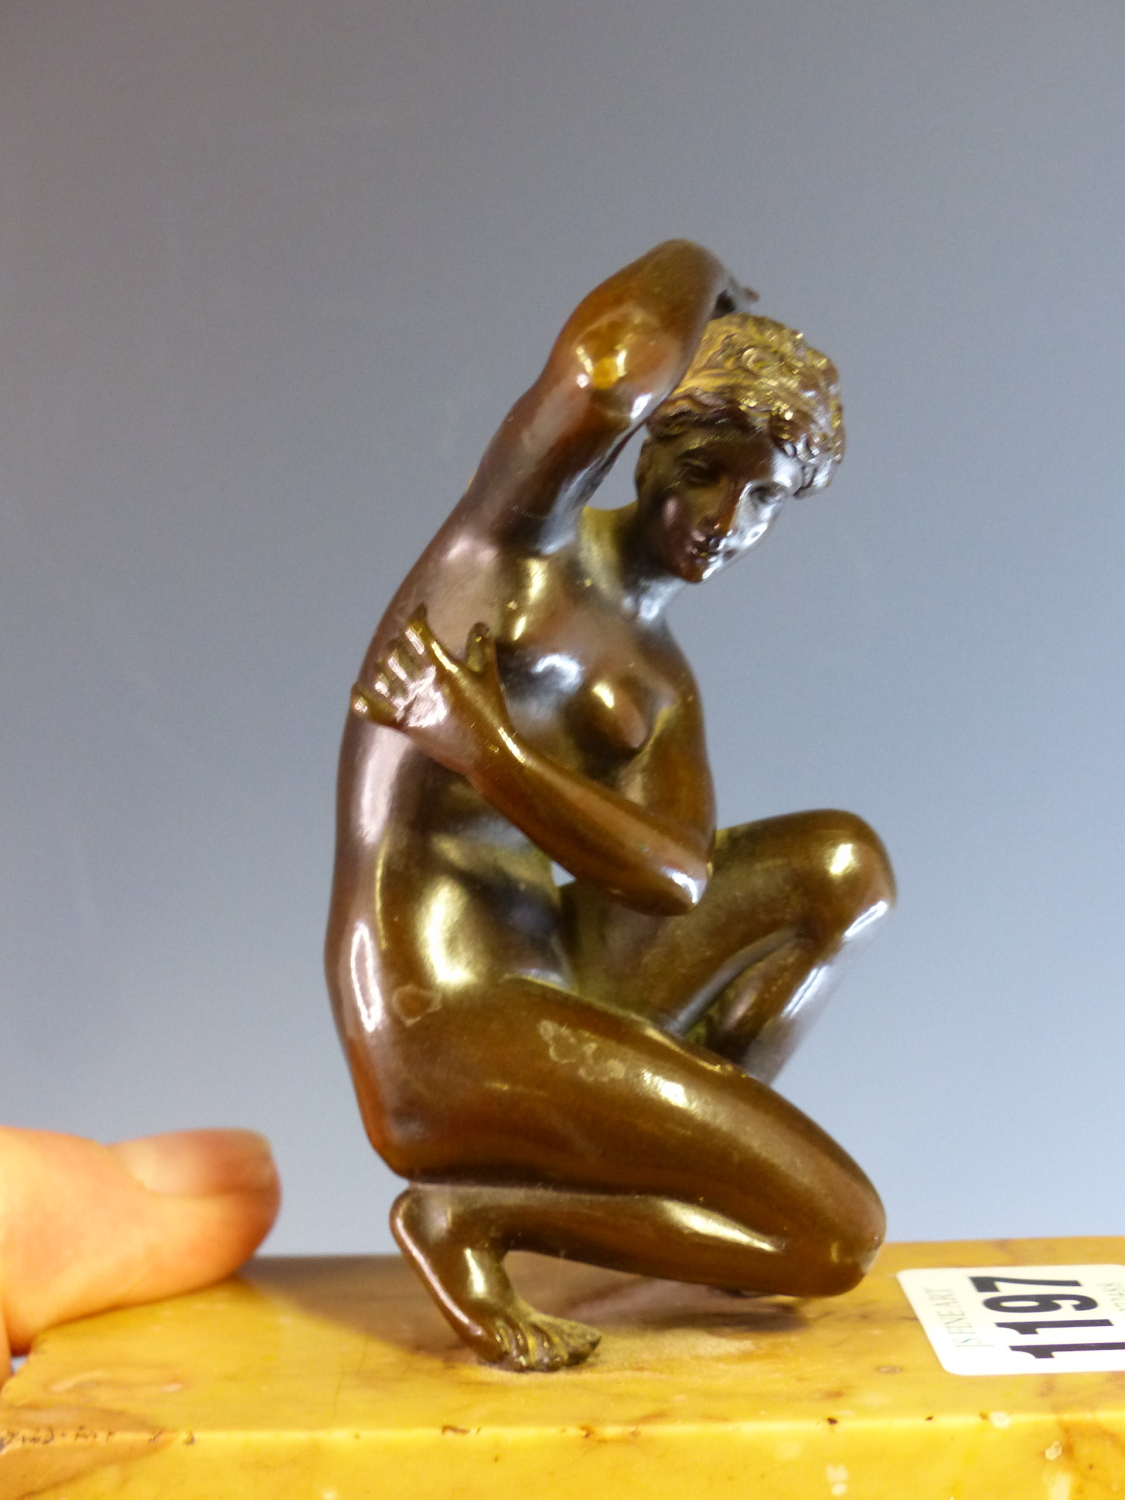 AFTER THE ANTIQUE, GRAND TOUR BRONZES OF THE ARROTINO AND OF THE CROUCHING VENUS BOTH WITH ONE - Image 13 of 19